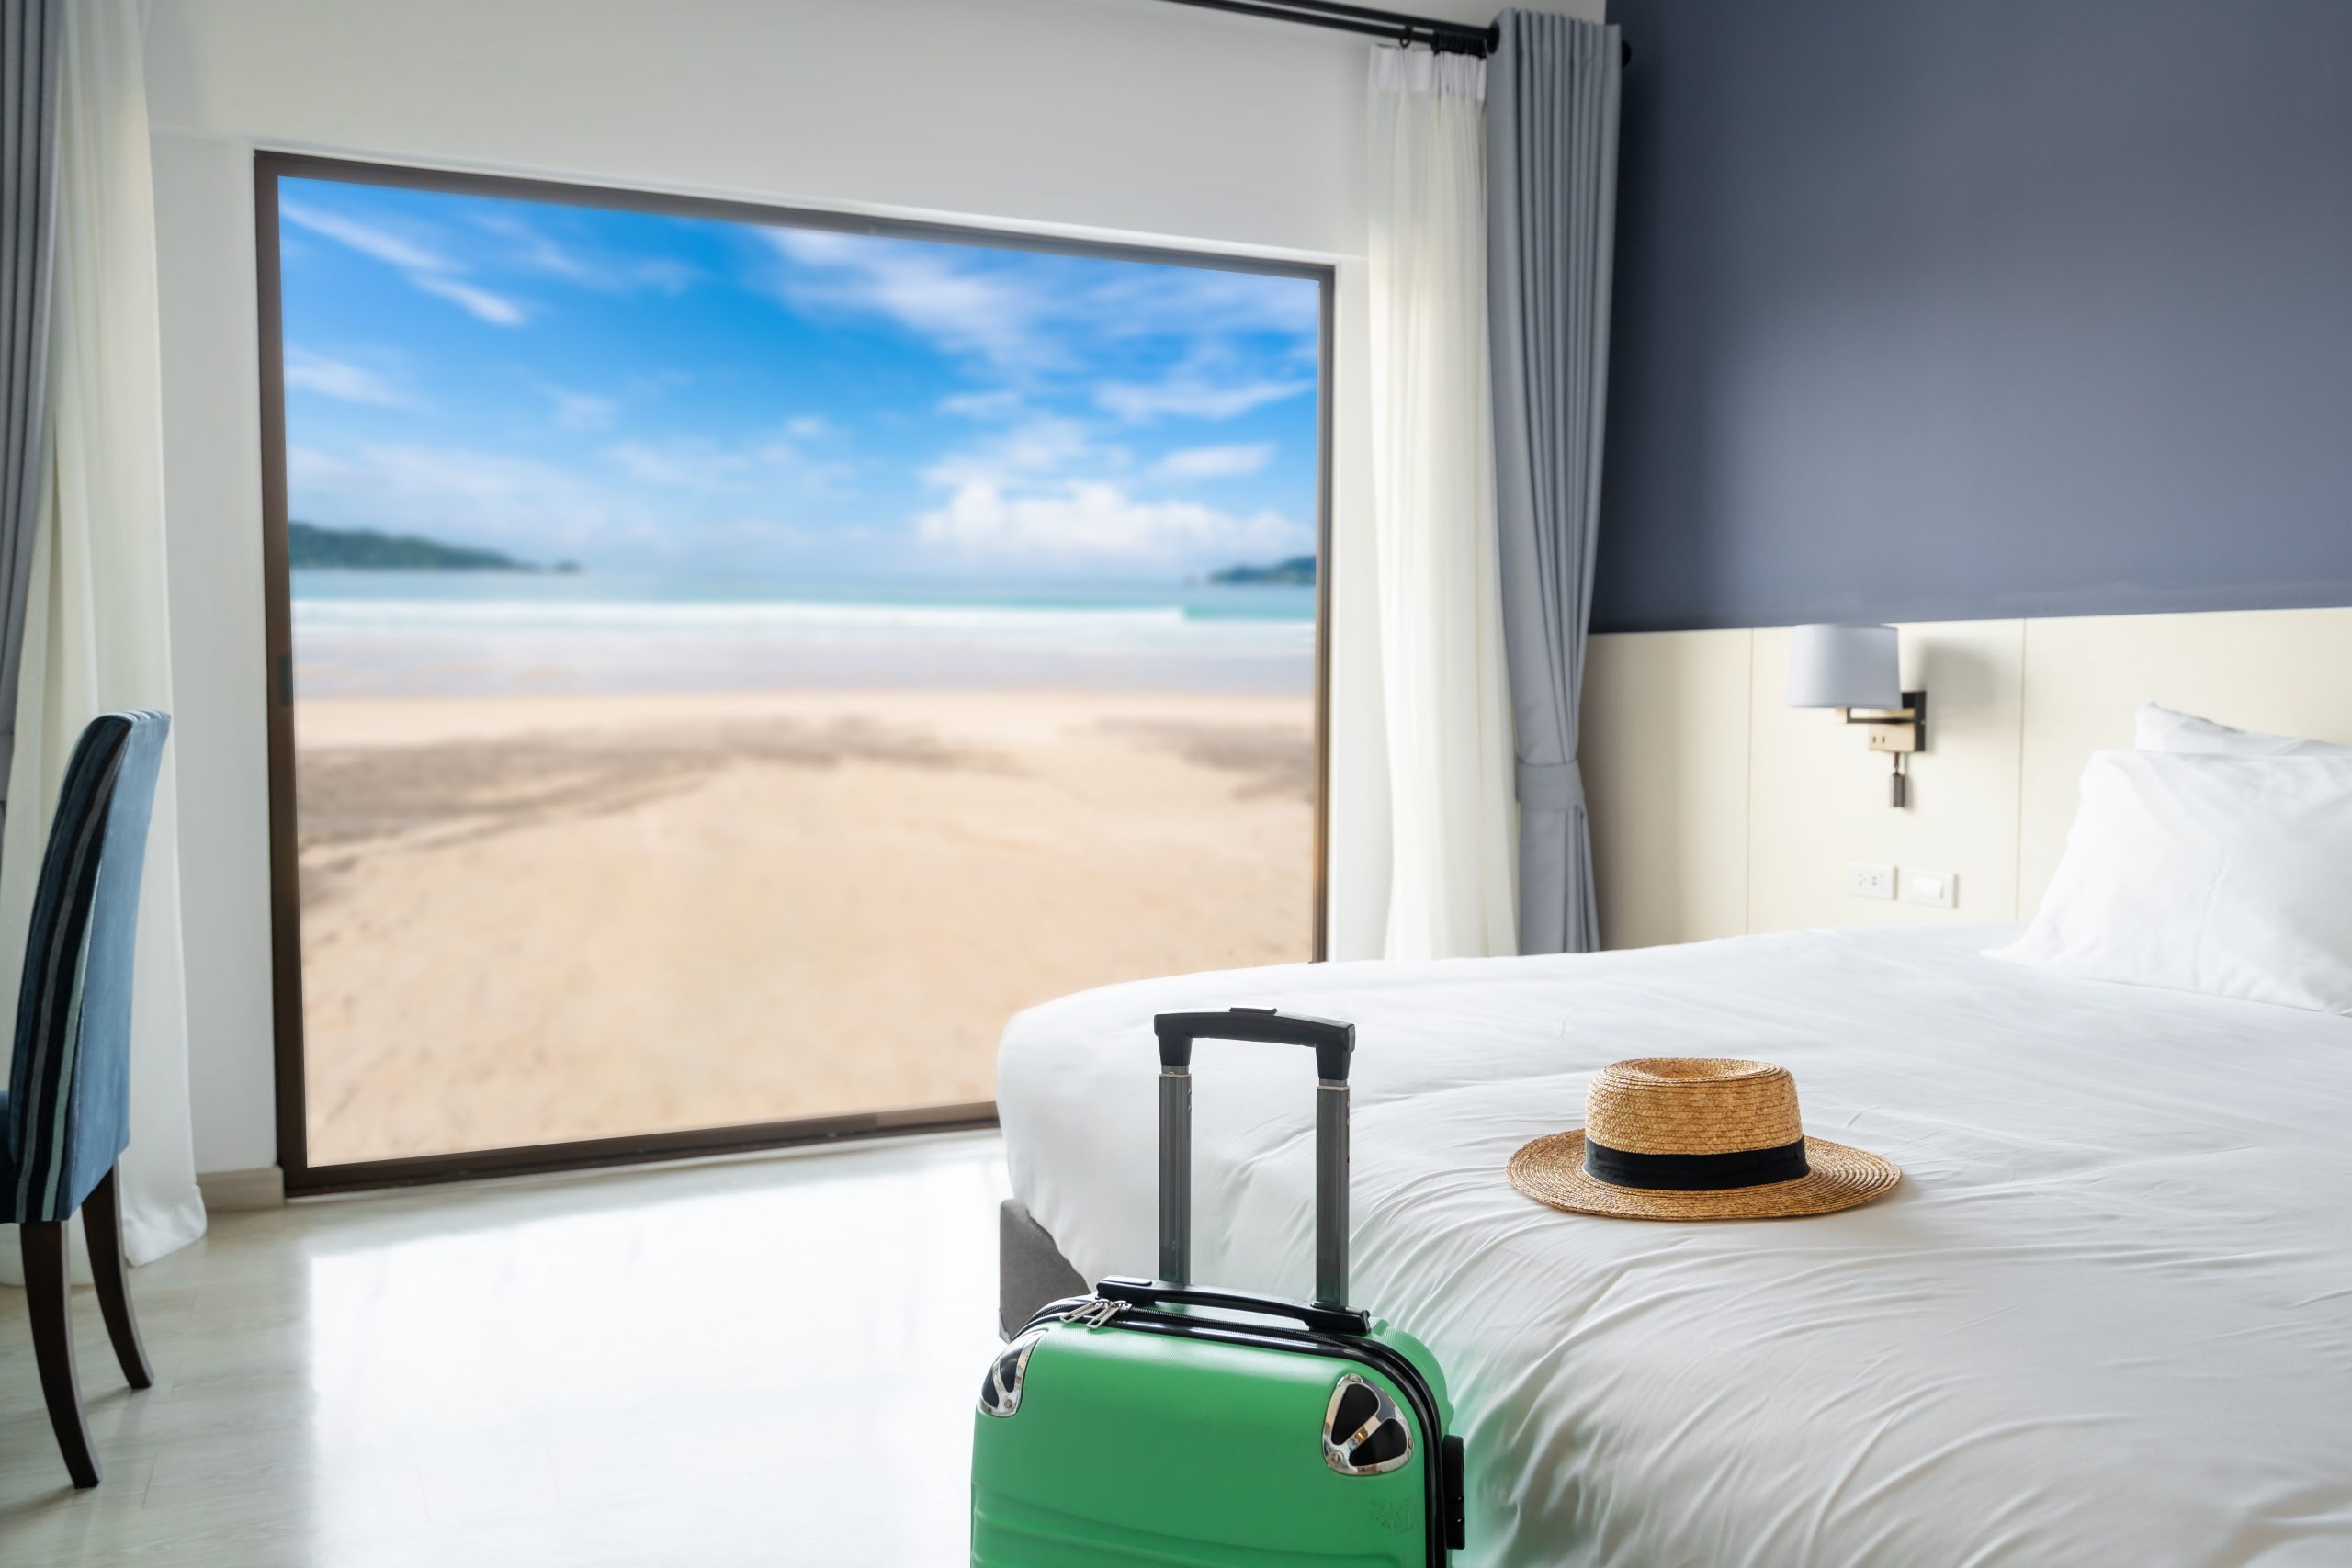 Luxury sea view hotel room with baggage, Travel concept